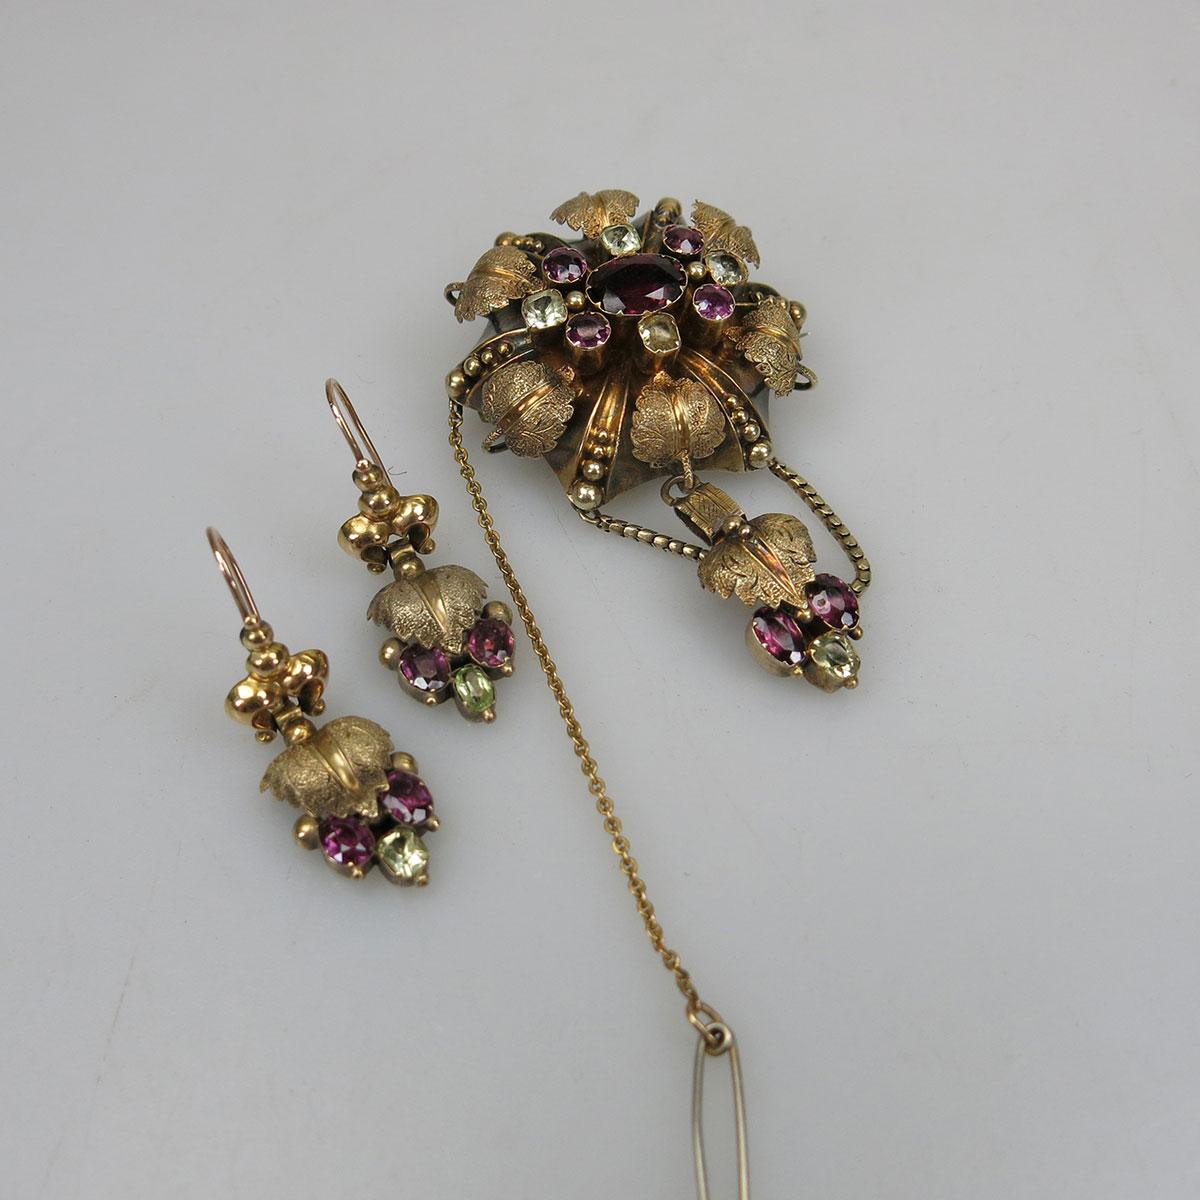 Victorian Gold And Gold-Filled Brooch And Earrings